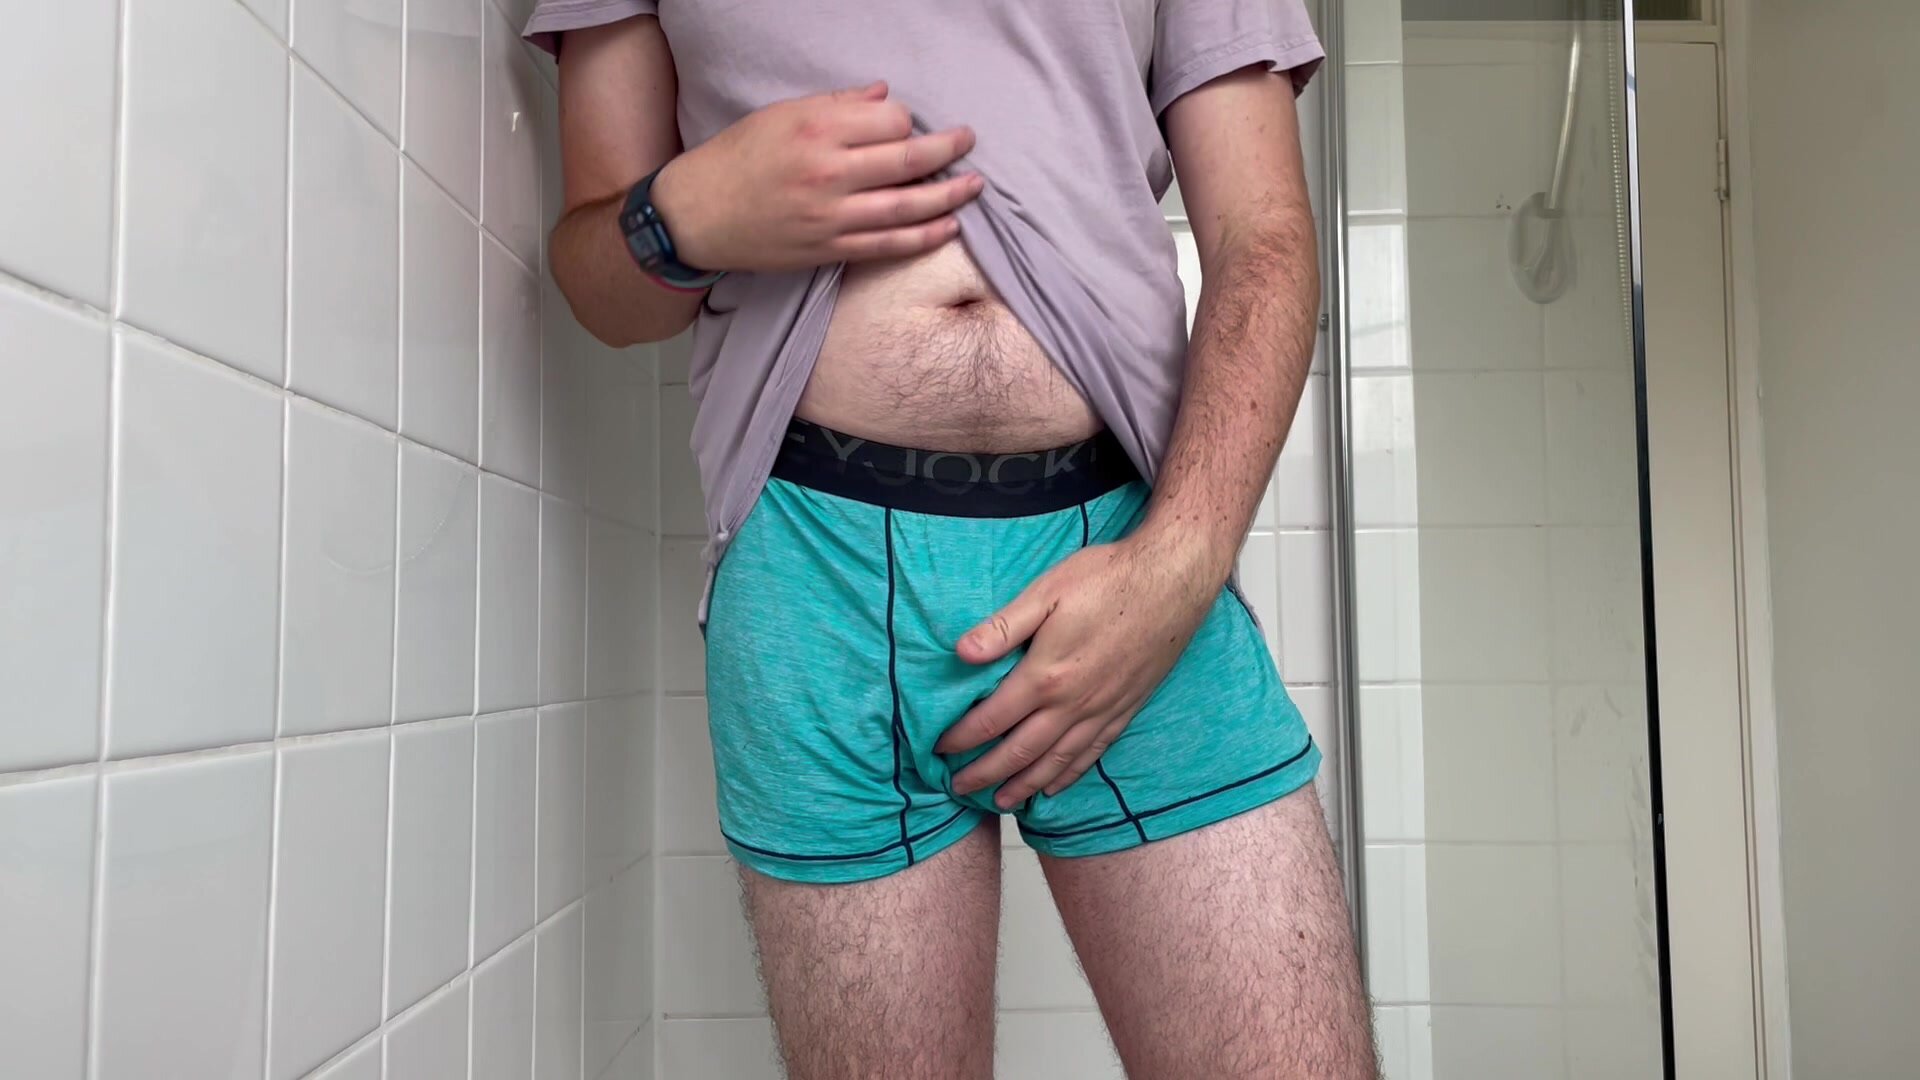 Pissing borrowed boxers